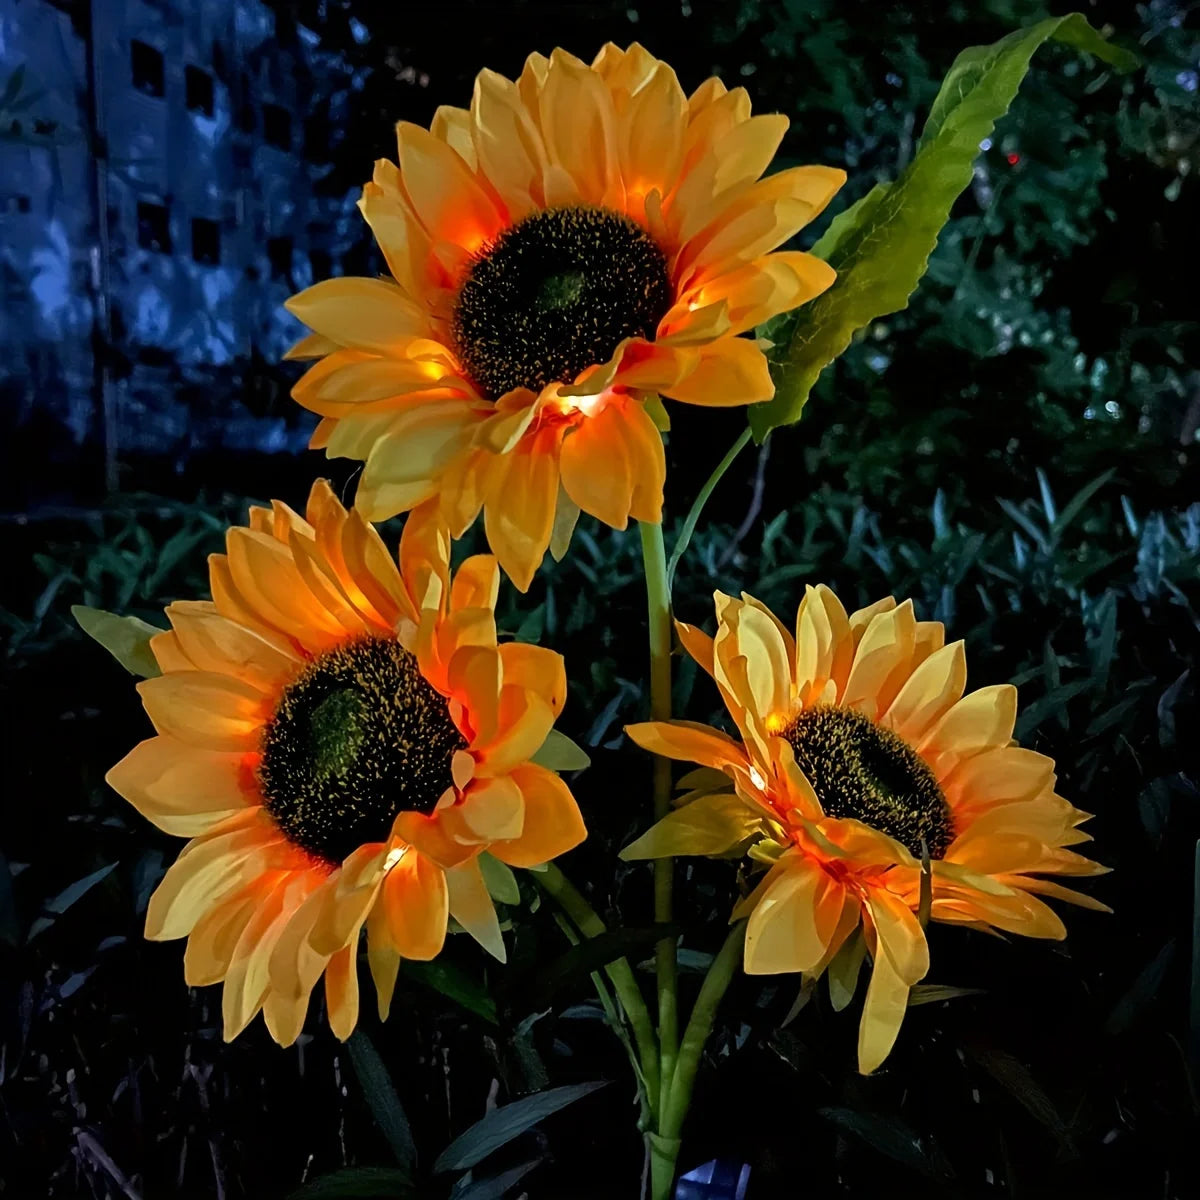 "Sunflower Solar Garden Stake: Illuminate Your Outdoor Space with Waterproof LED Lights"